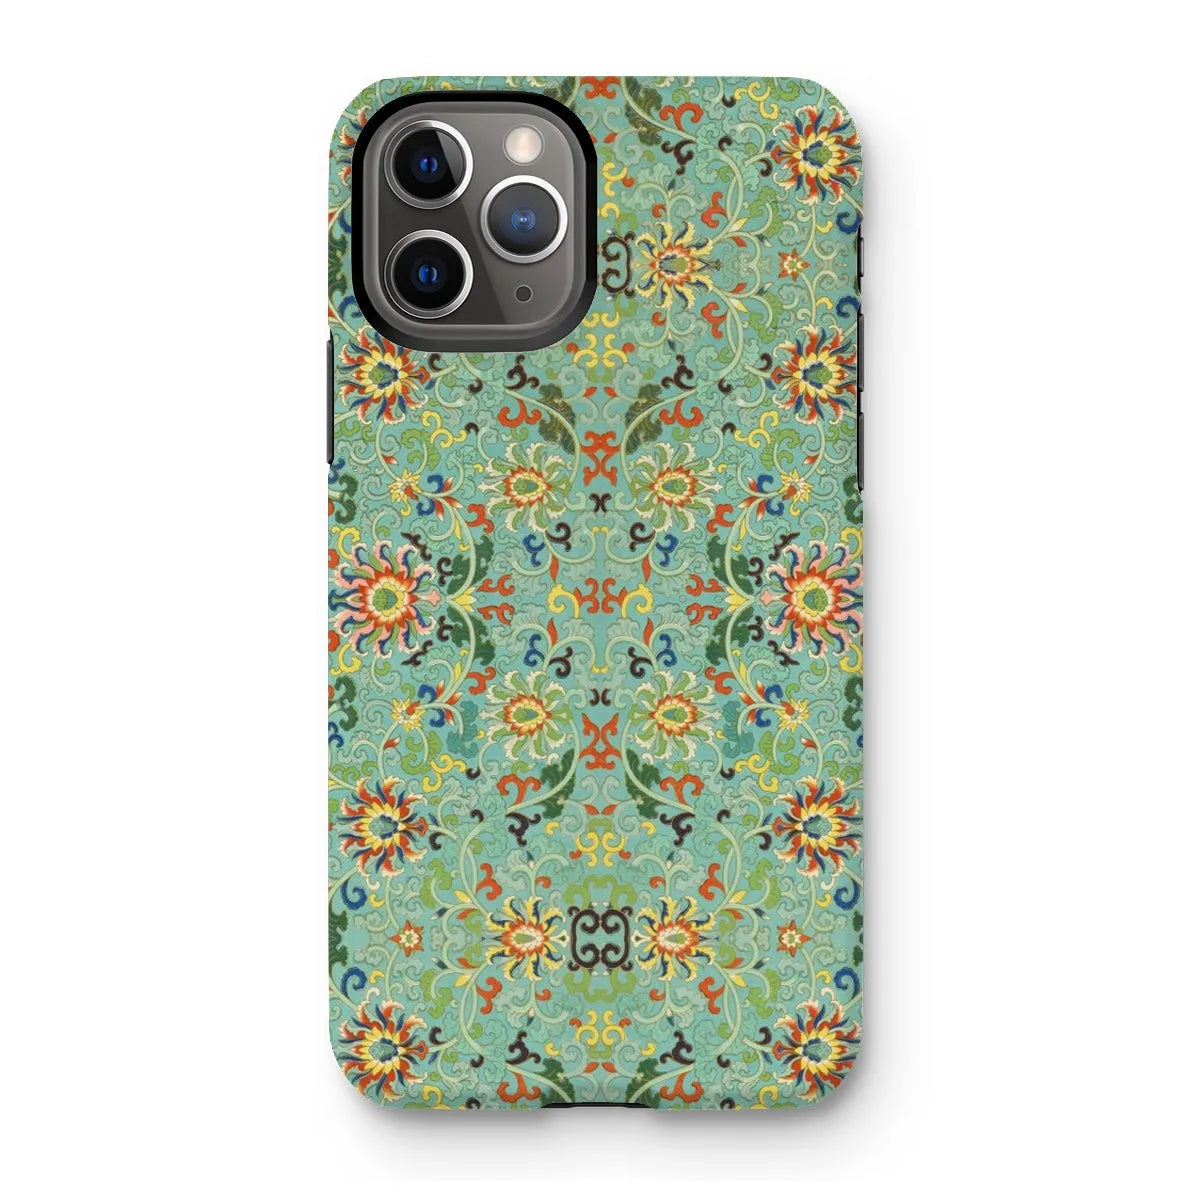 Lotus Candy - Chinese Aesthetic Pattern Art Phone Case - Iphone 11 Pro / Matte - Mobile Phone Cases - Aesthetic Art